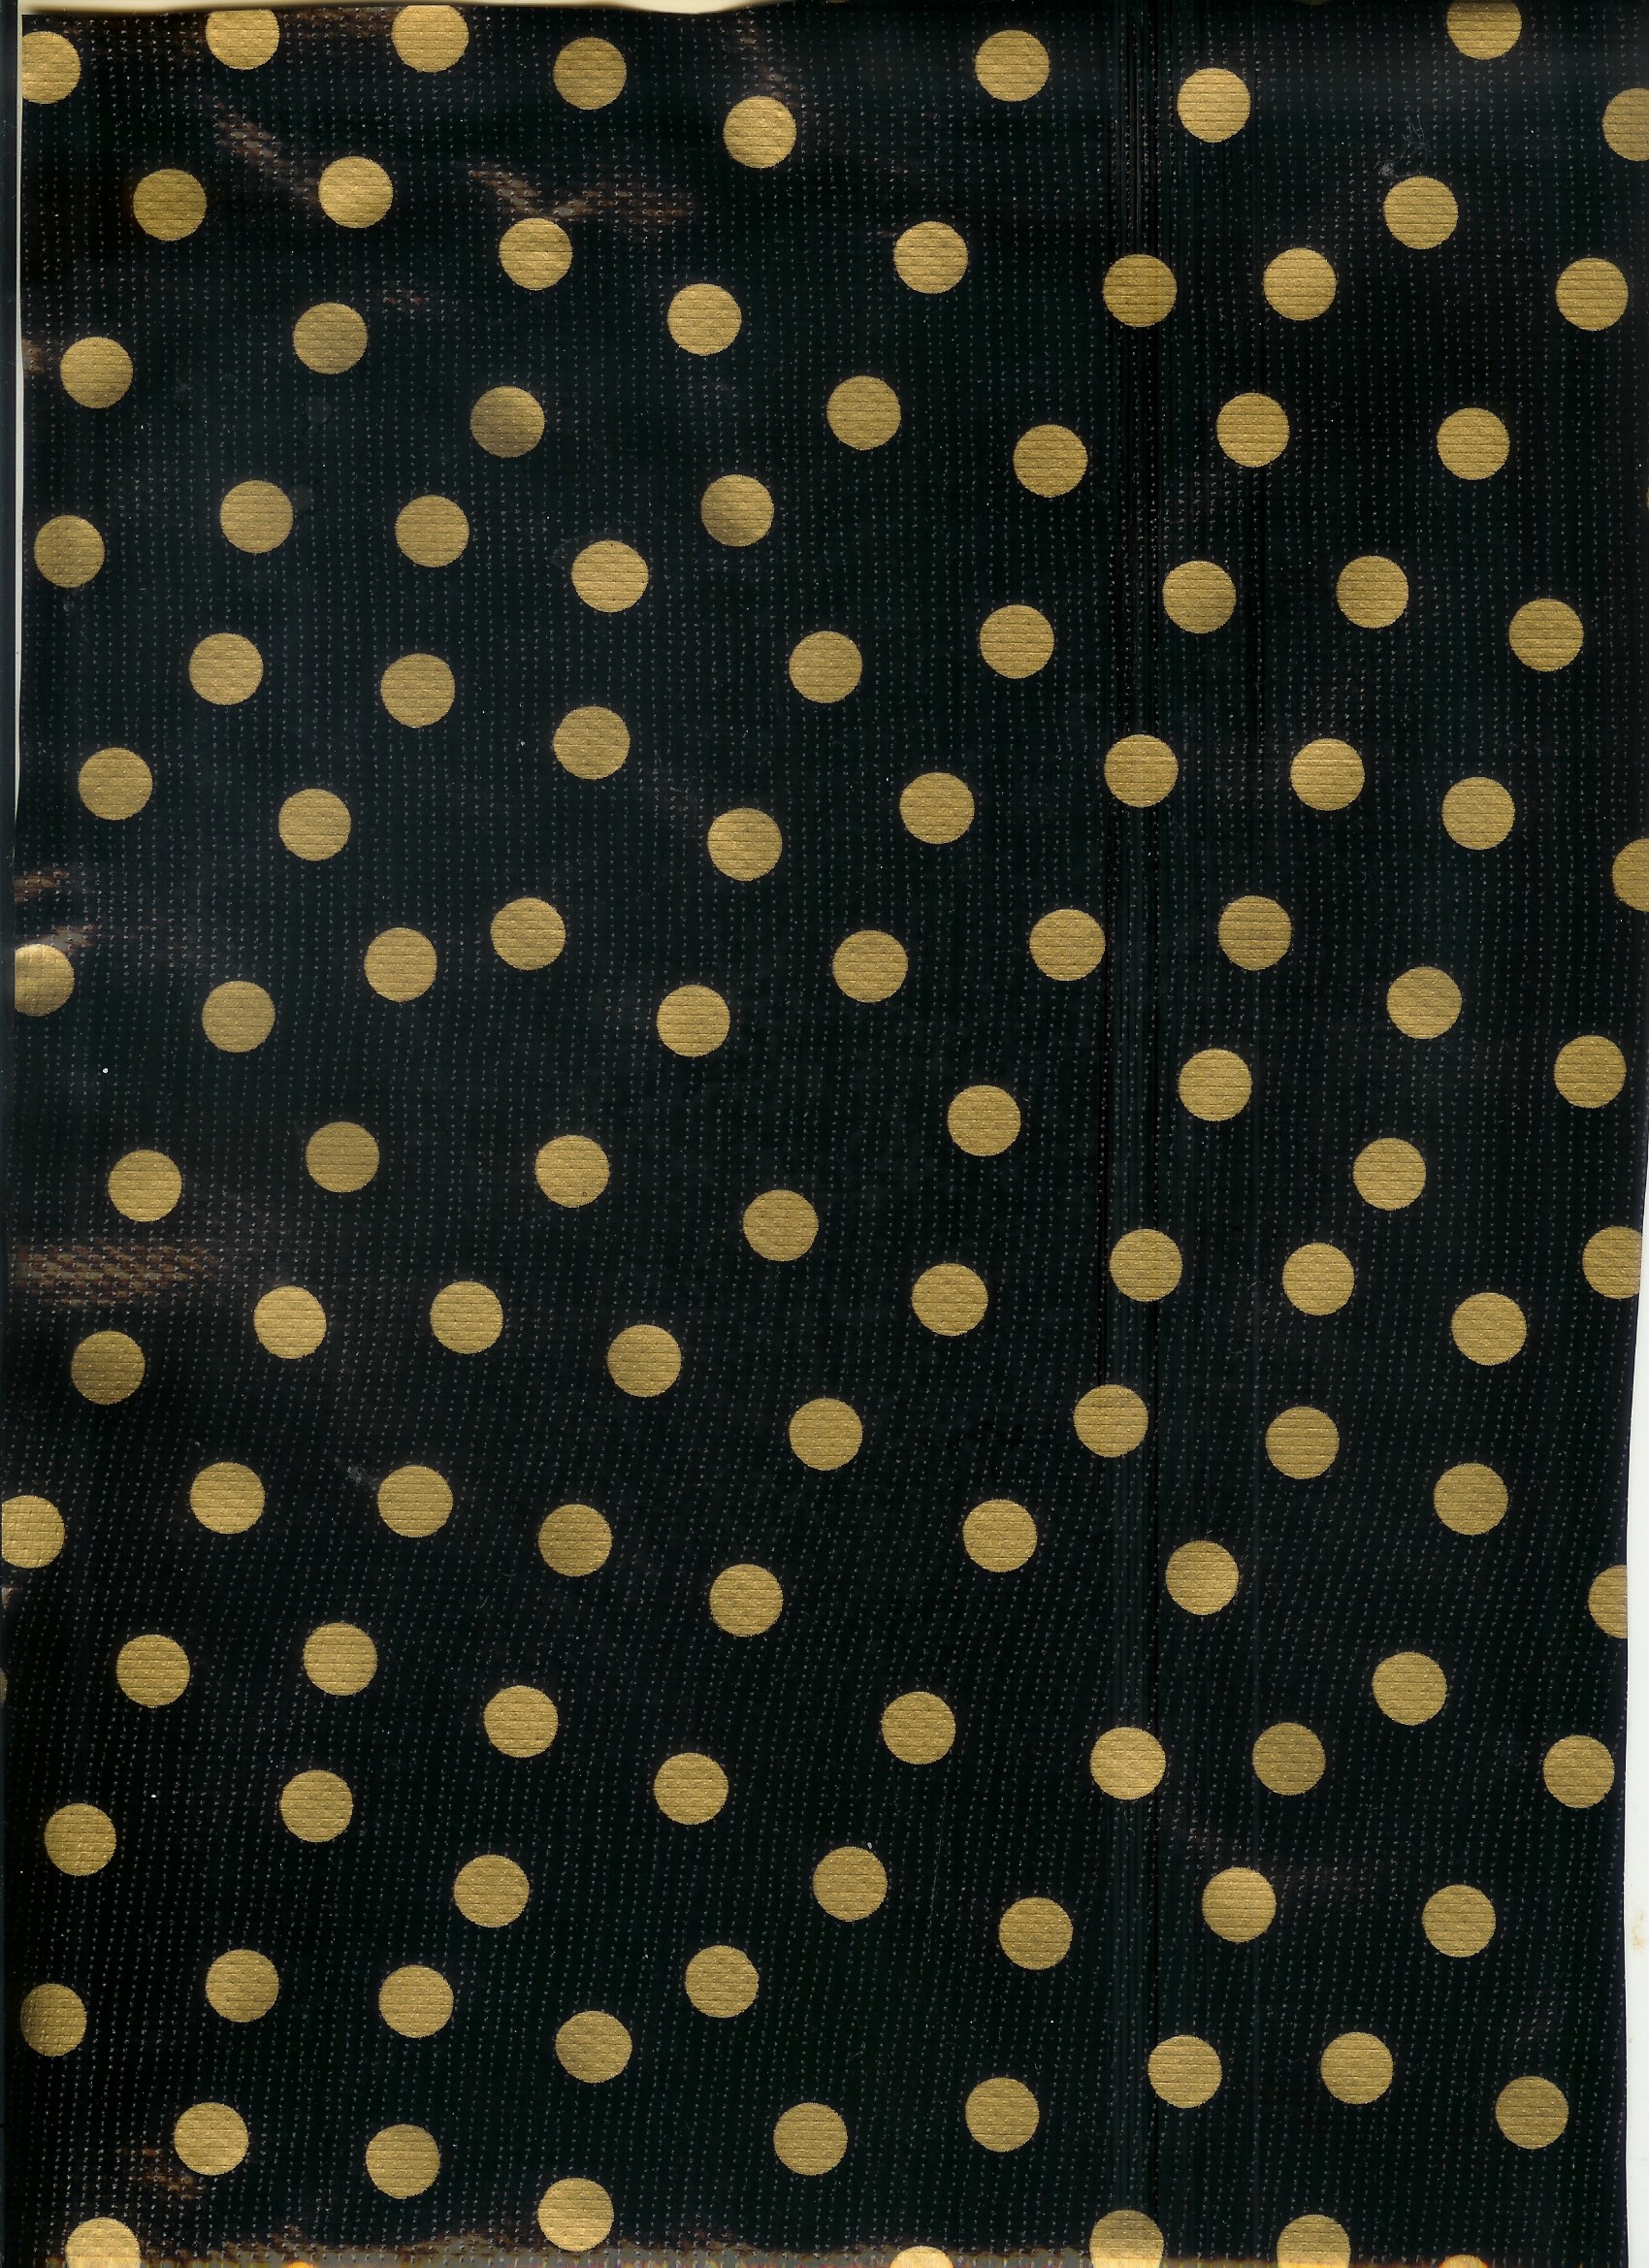 6900 Gold Polka Dots Stock Photos Pictures  RoyaltyFree Images   iStock  Confetti Polka dot pattern Paper